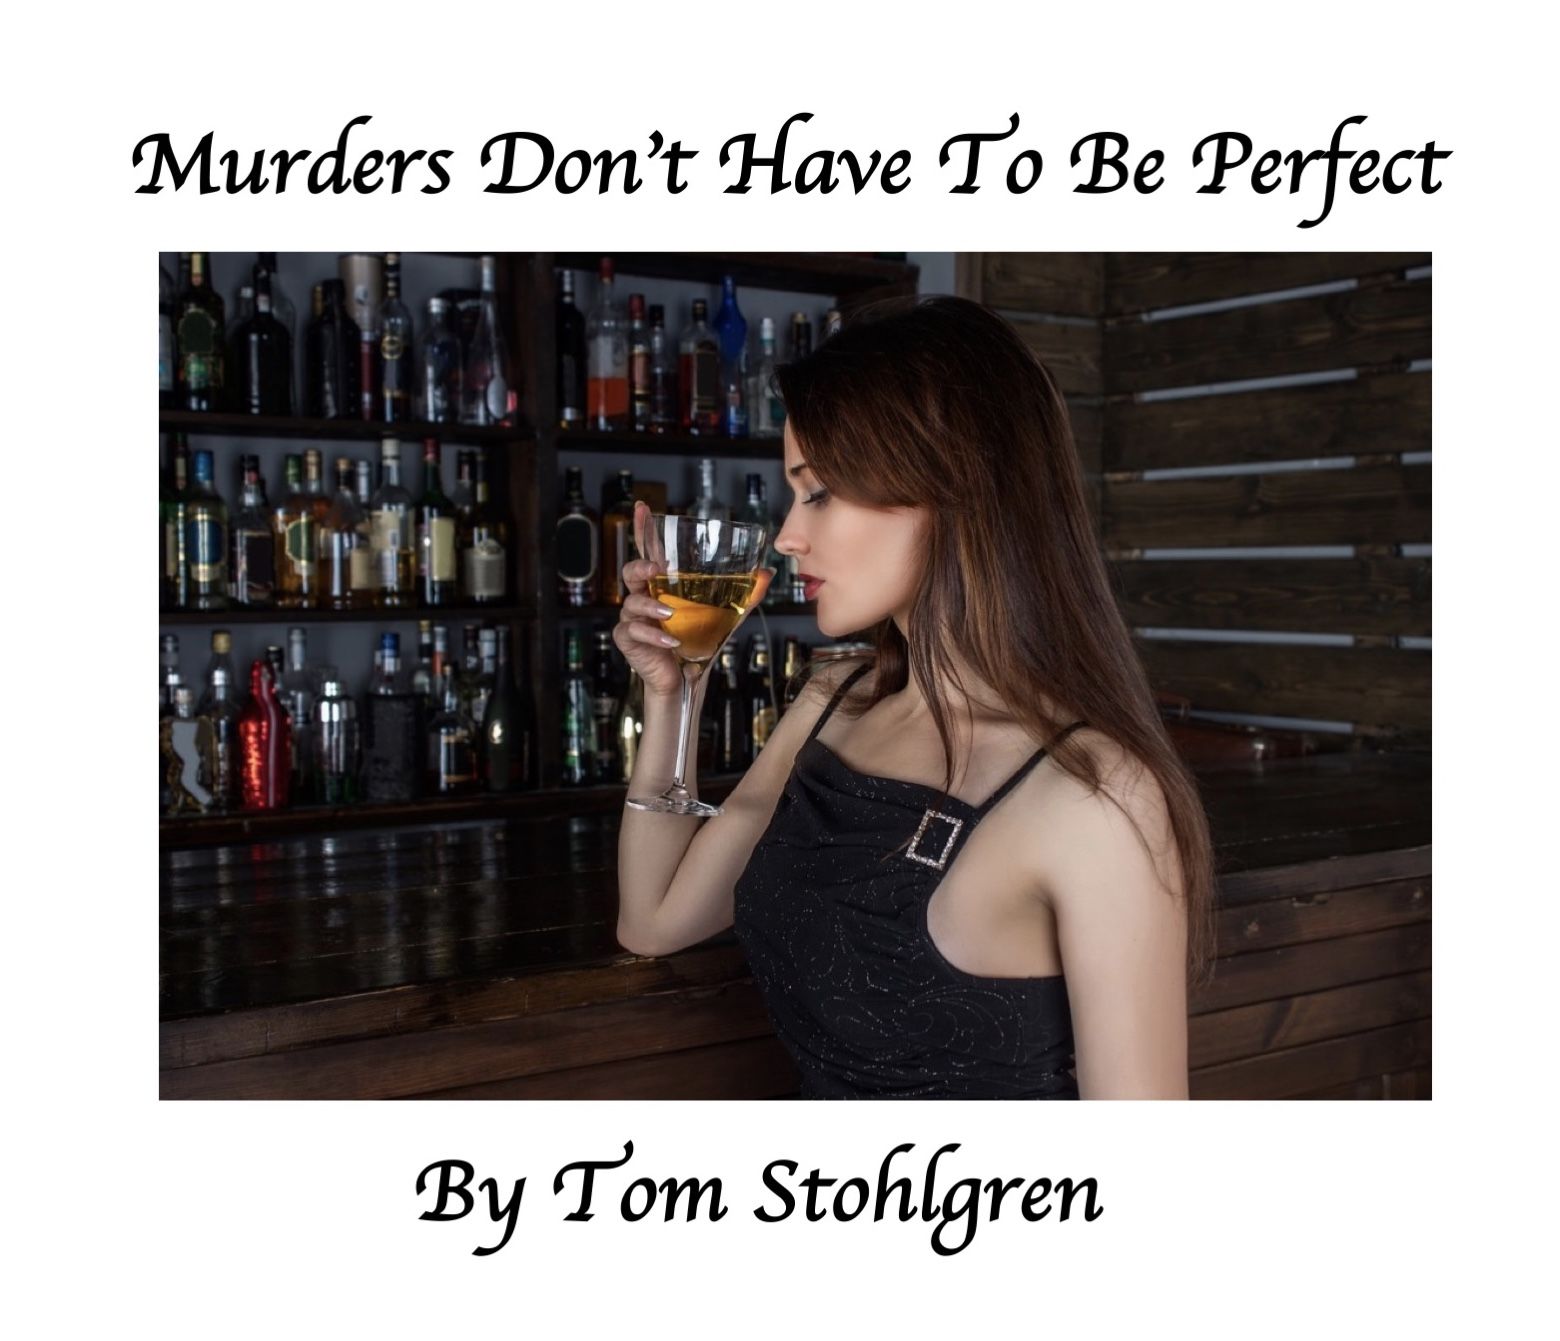 MURDERS DON'T HAVE TO BE PERFECT/ NOW "TWISTED VINES"